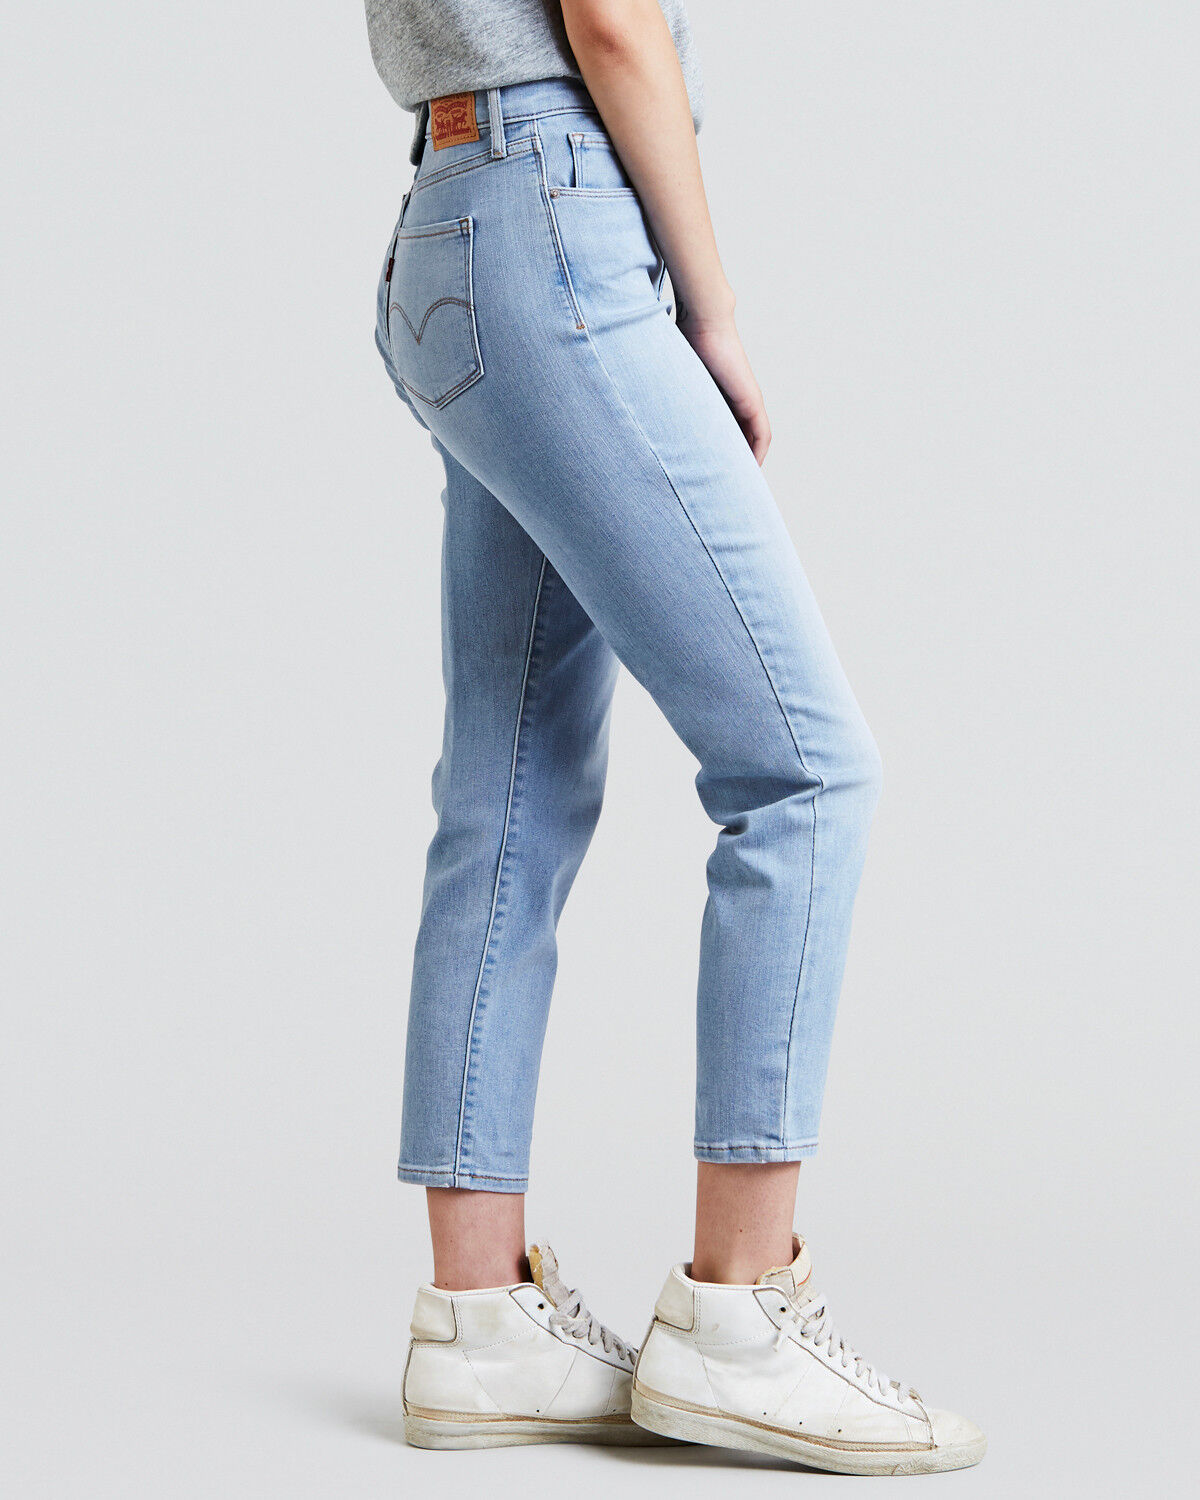 levi's cropped jeans womens